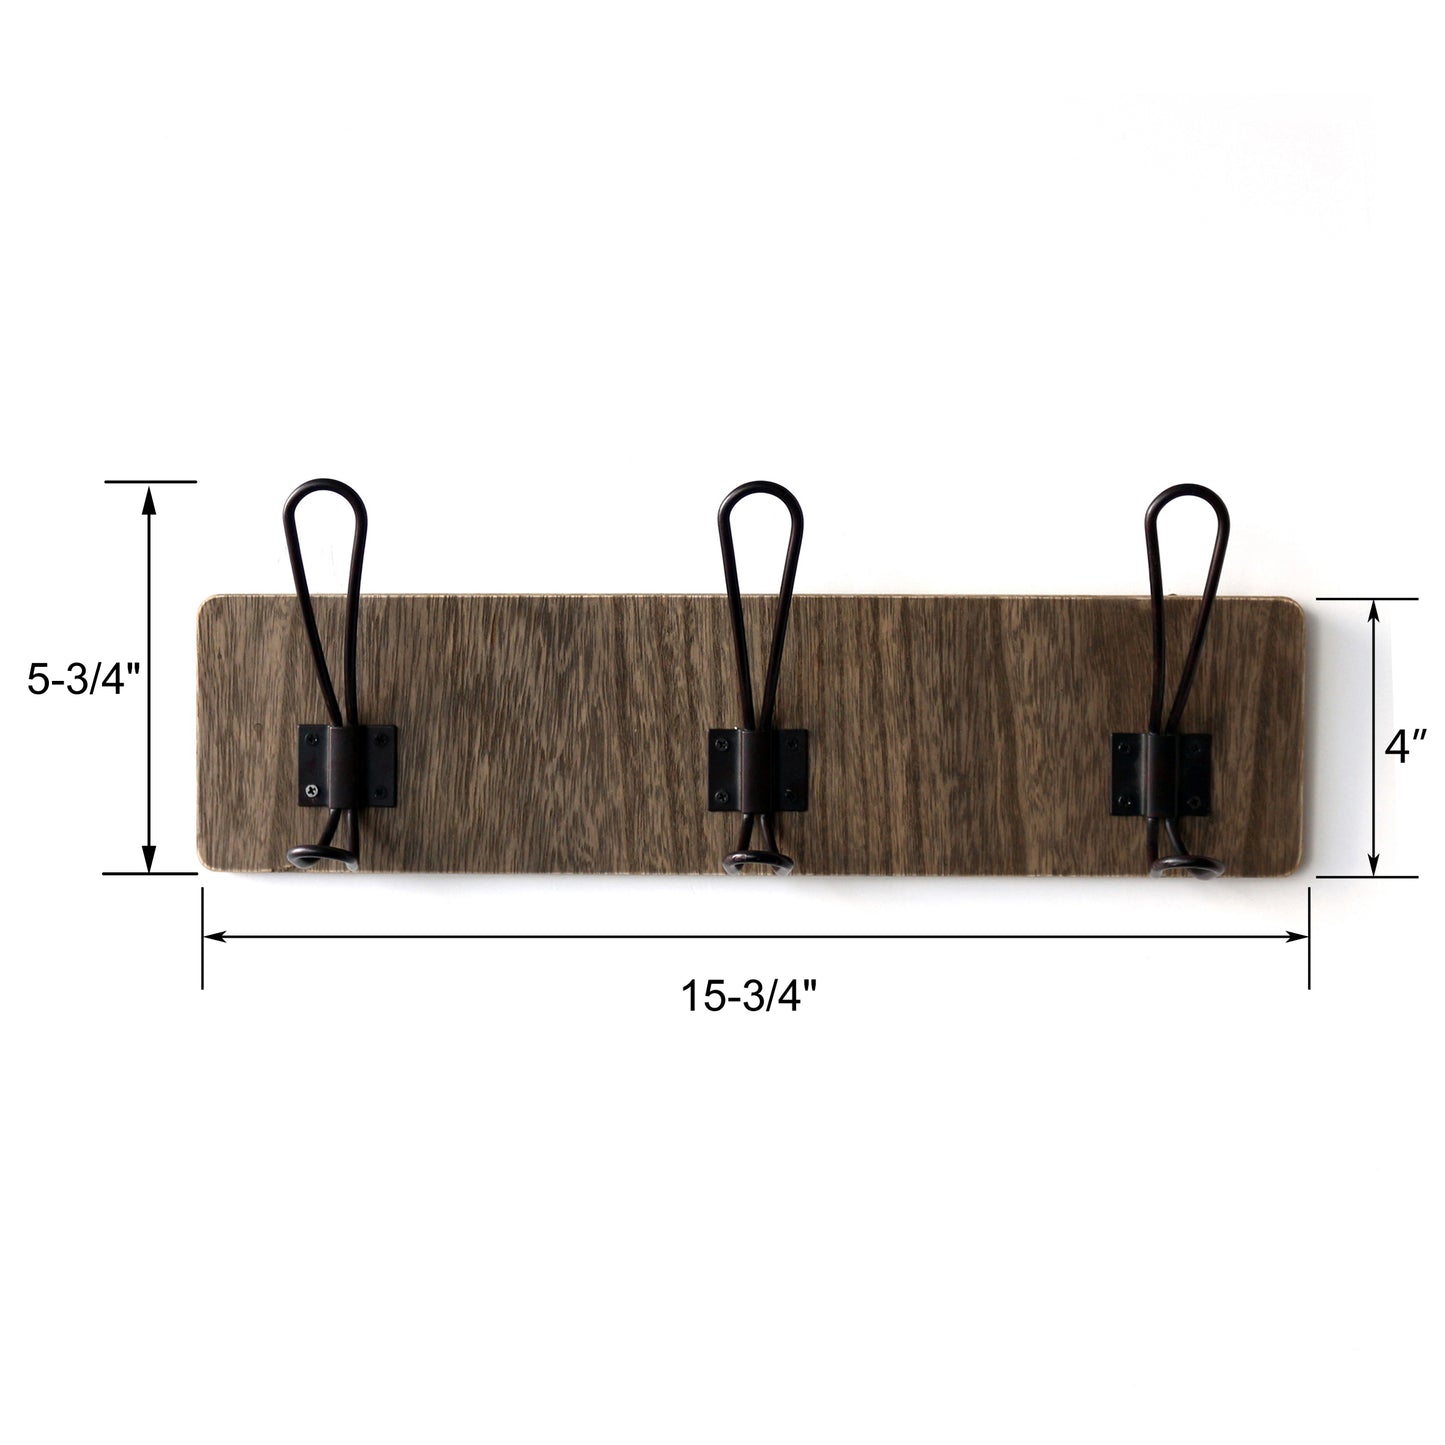 CVHOMEDECO. Vintage Distressed Entryway Wooden Hook Wall Mount or Door Hanger Clothes Coat Hooks Towel Hat Scarf Bags Rack with Triple Metal Iron Hooks. Black Walnut Color, 15.75 X 5.75 X 3 Inch